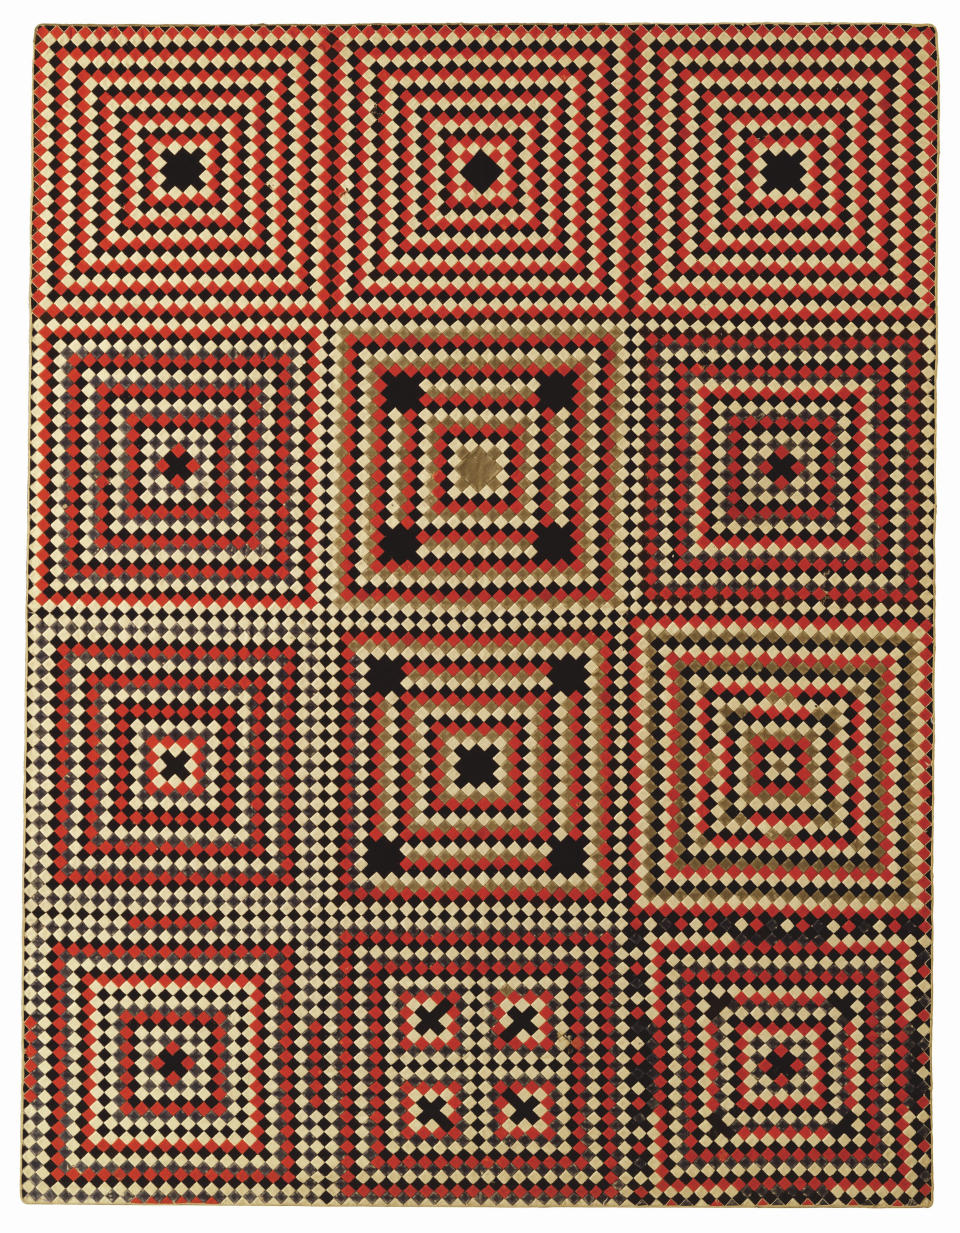 This image provided by the American Folk Art Museum shows the Soldier's Quilt: Square Within a Square. It's made of the thick red, yellow and black wool used in military uniforms, and curators say the tight geometric motif of small squares was similar to woodworking patterns, perhaps an allusion to an activity considered masculine.(American Folk Art Museum via AP)